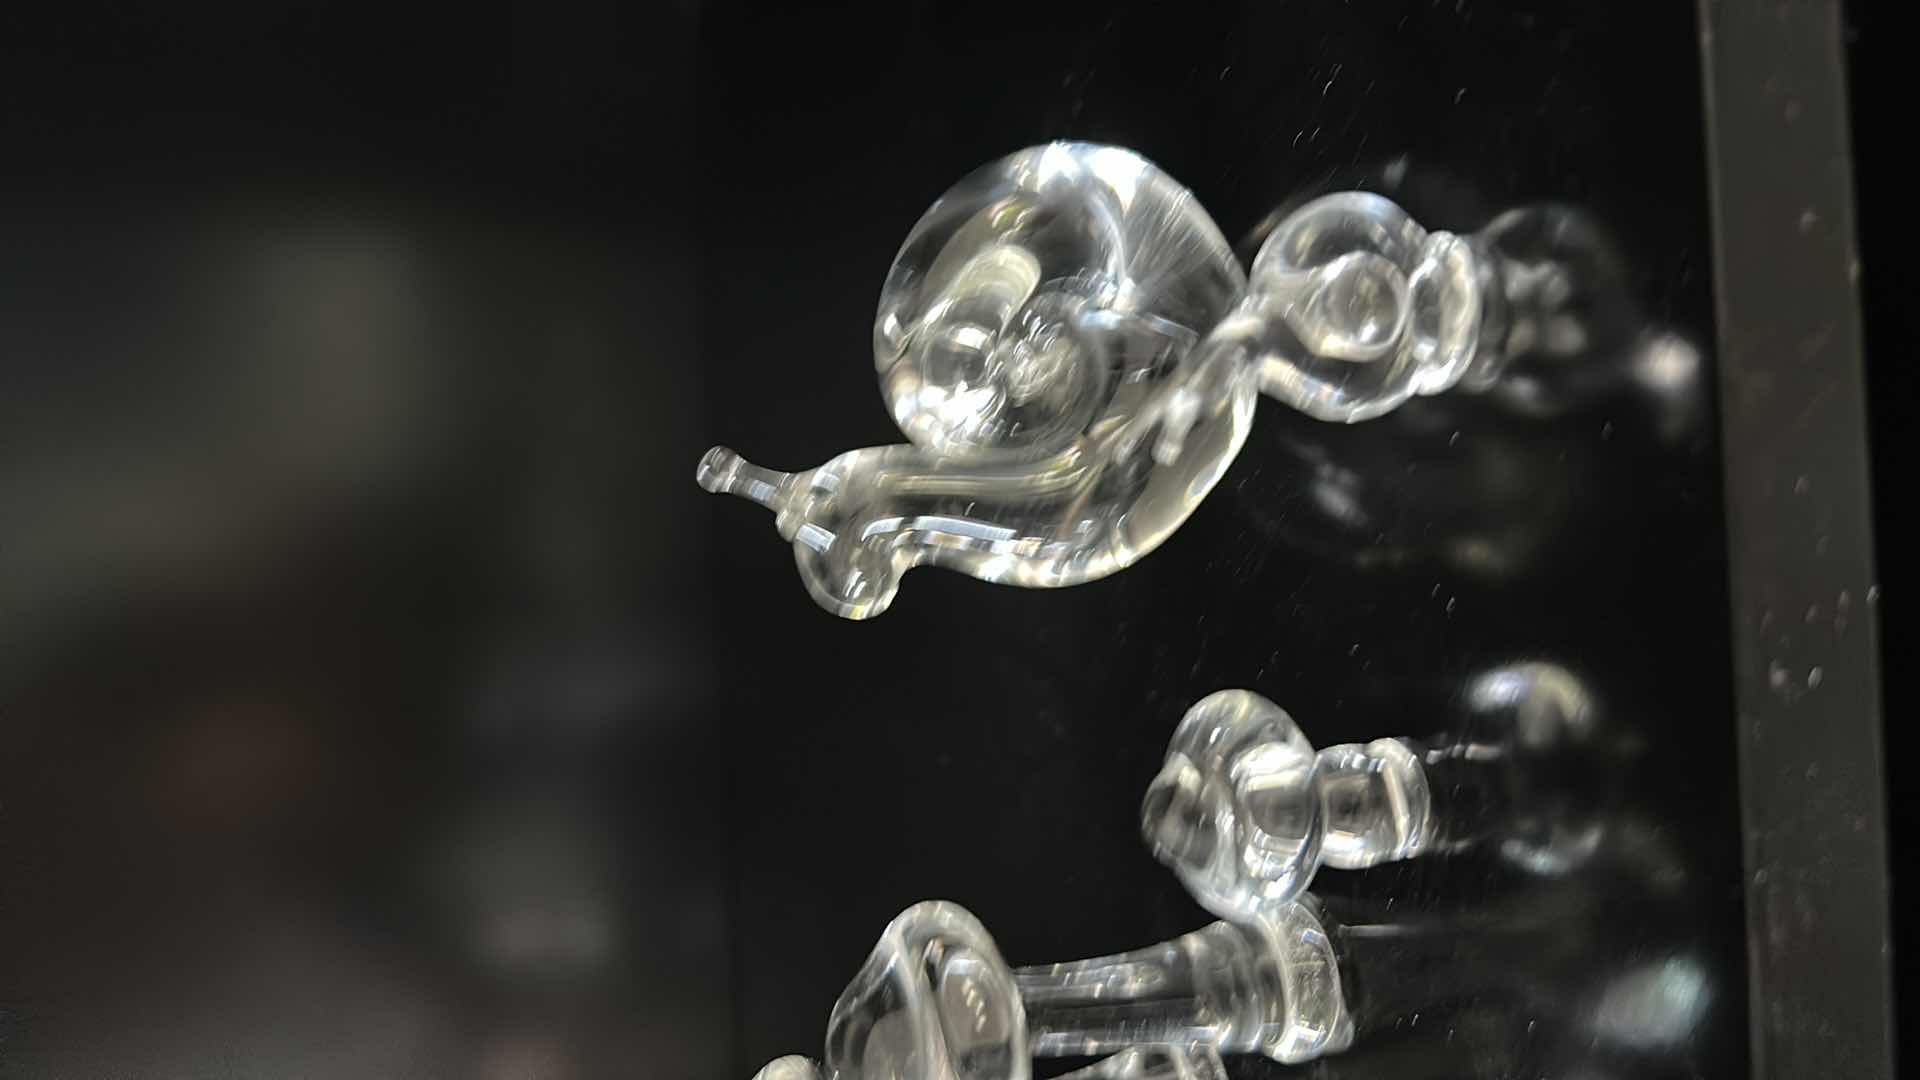 Photo 4 of HAND BLOWN GLASS FIGURINES SNAILS AND MUSHROOMS TALLEST 3.5”